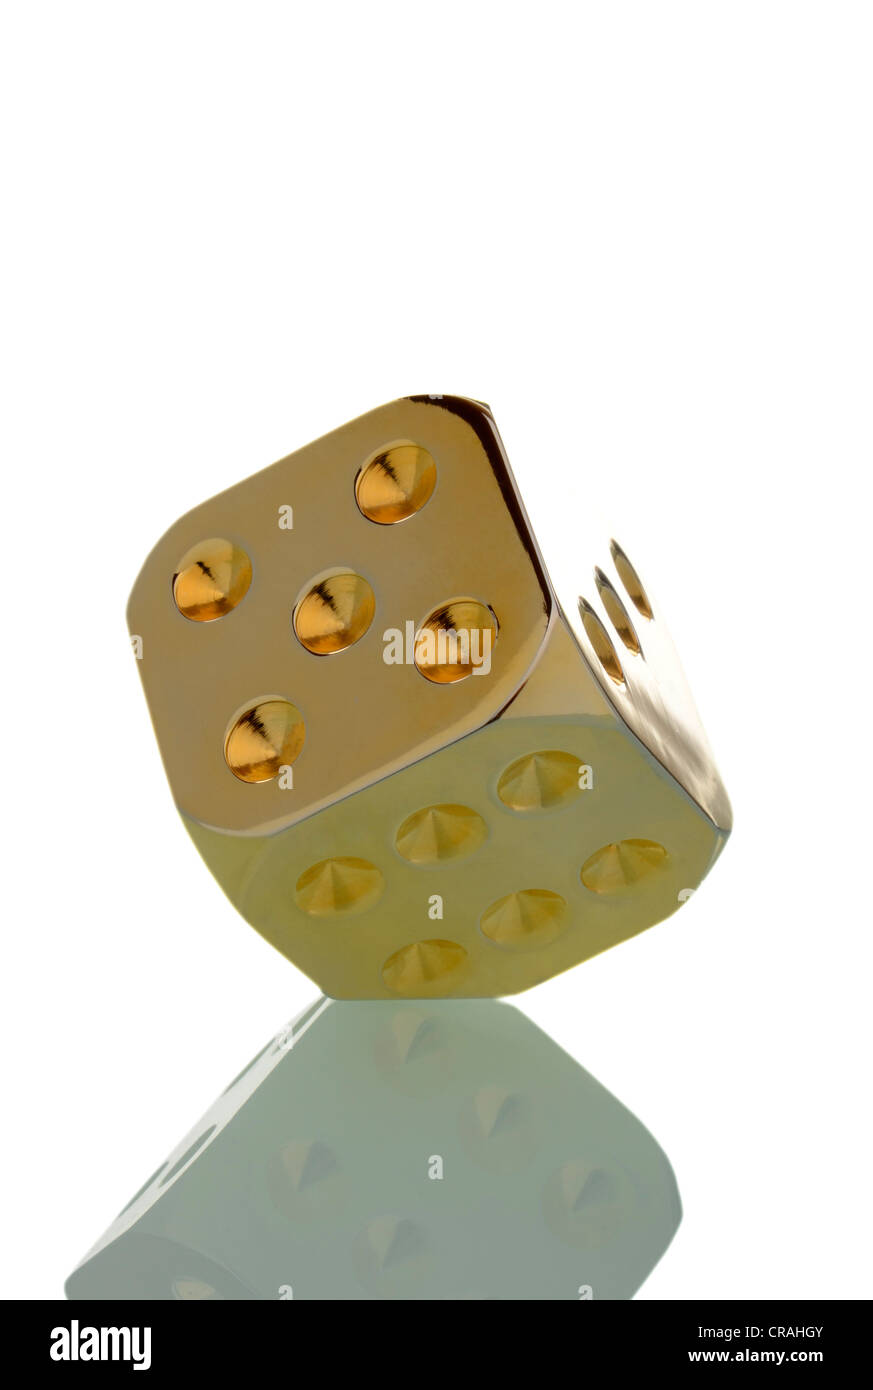 Golden die standing on one of its edges Stock Photo